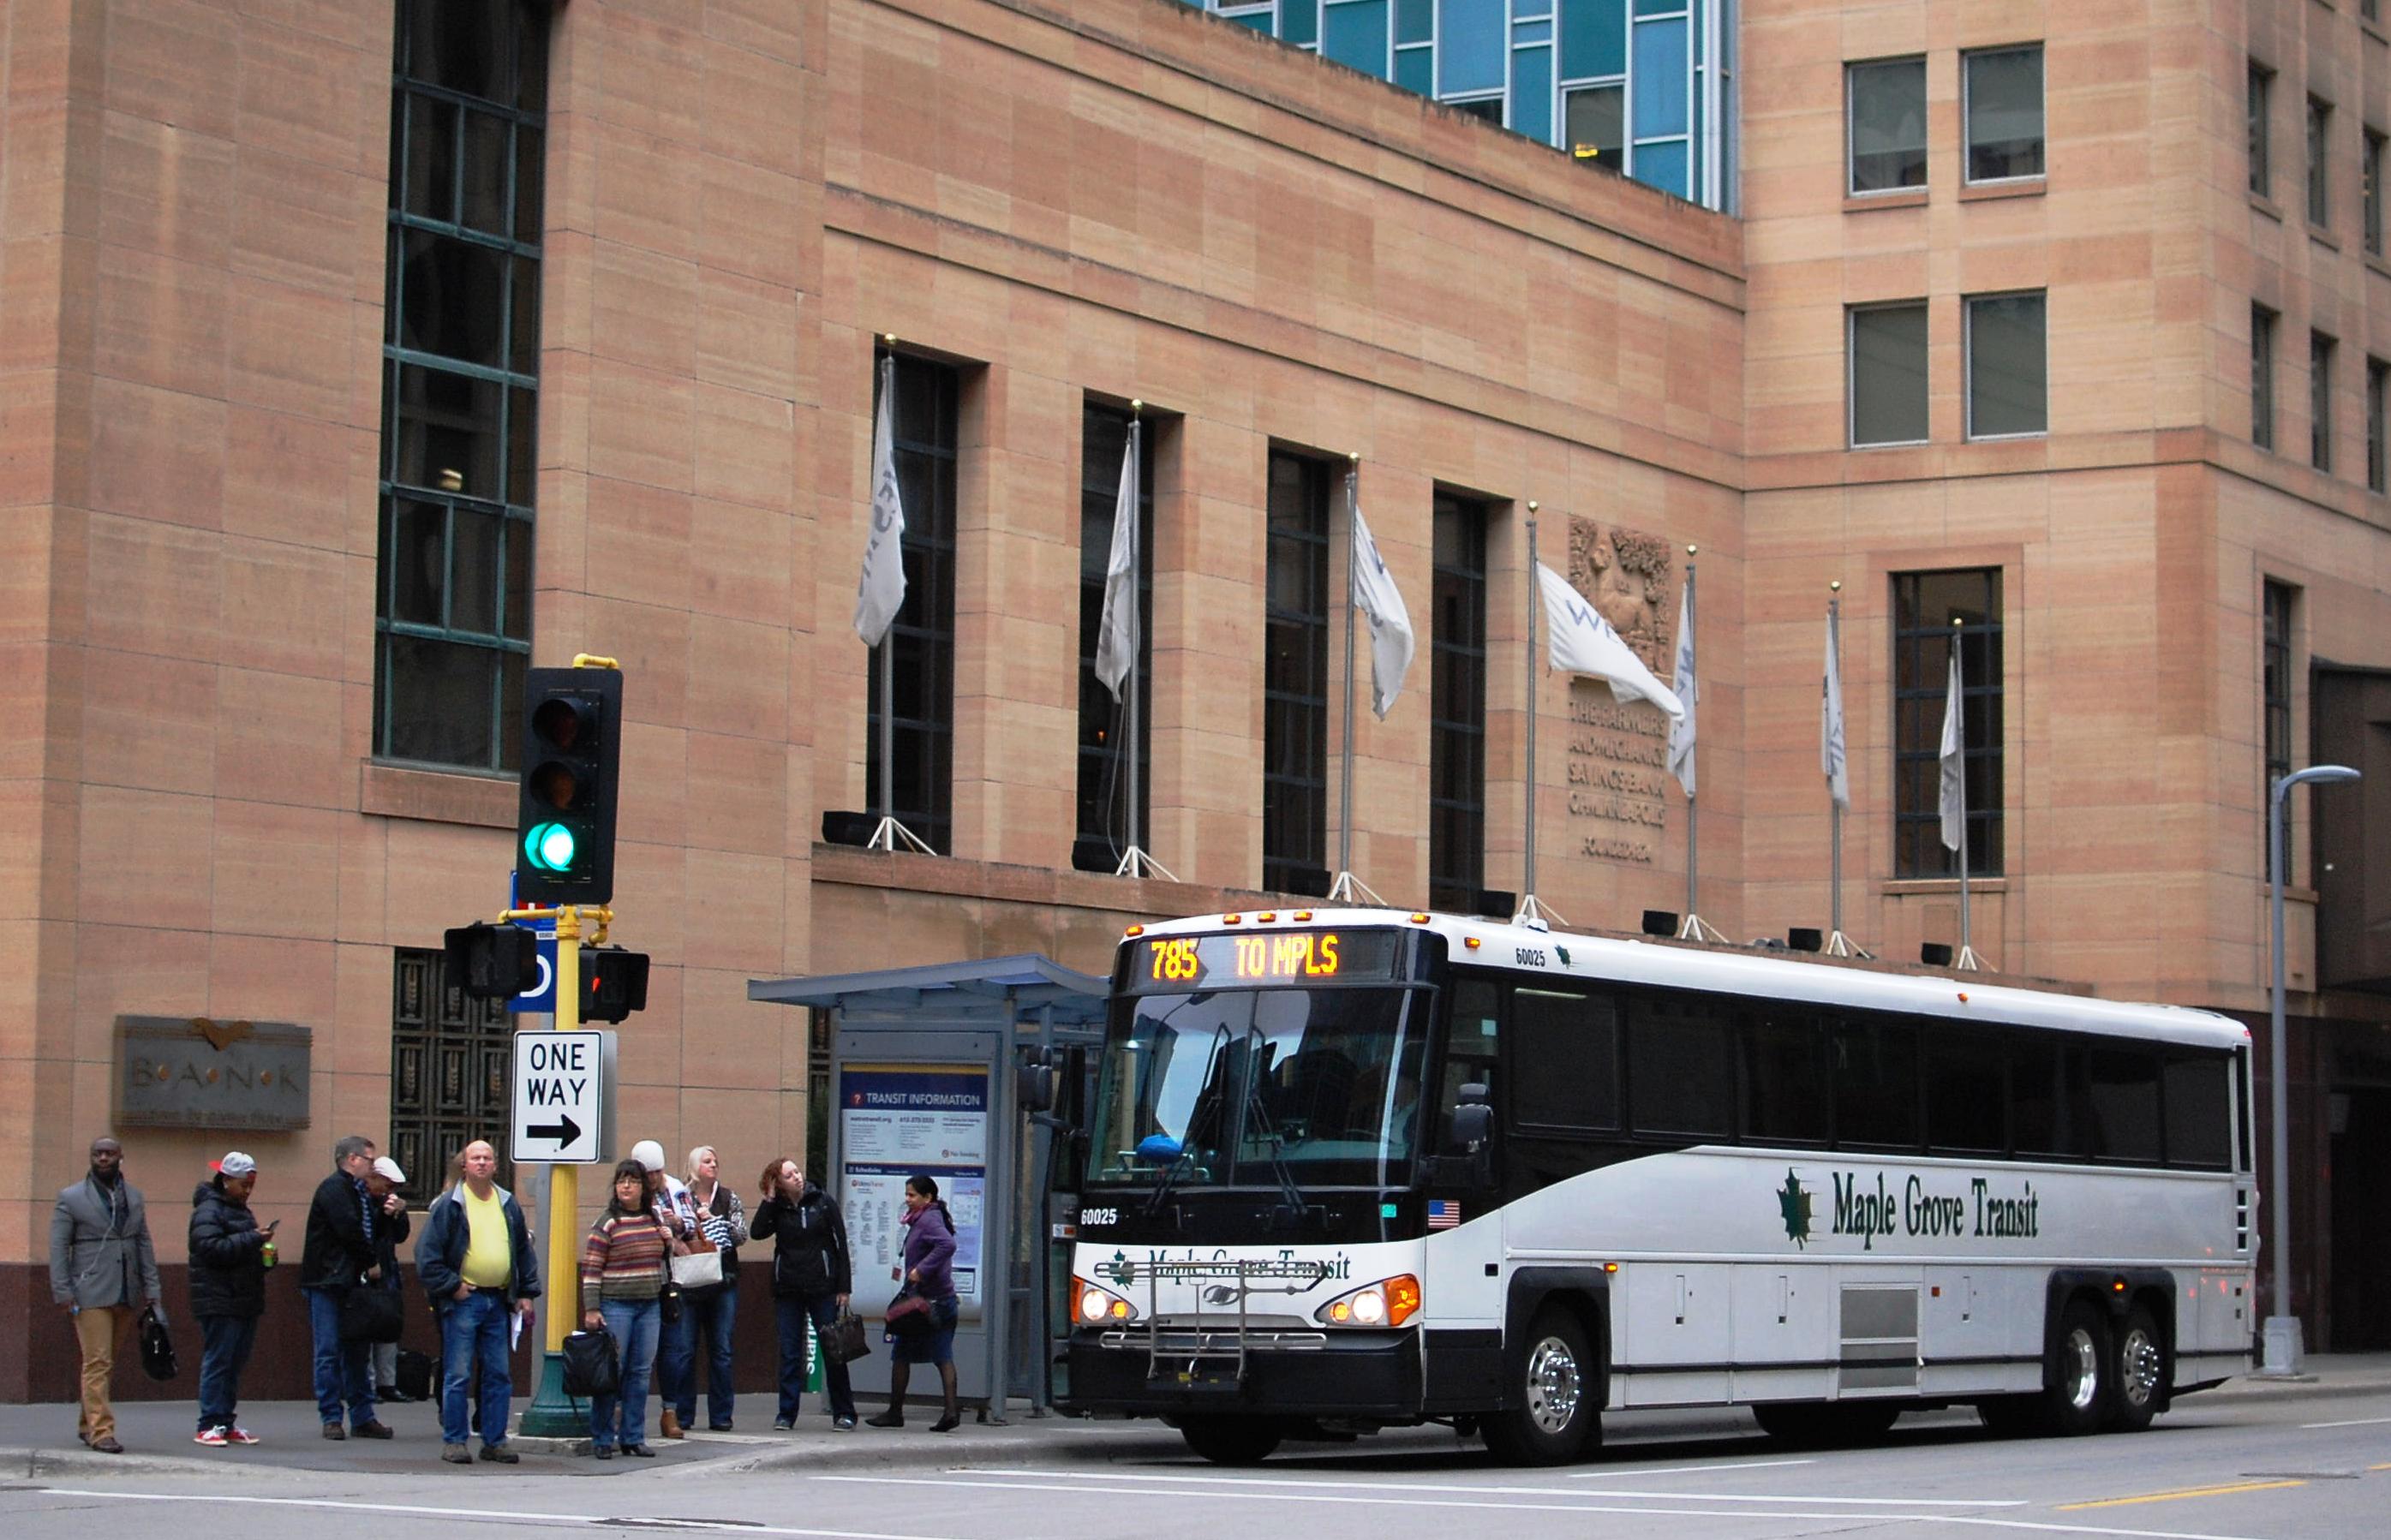 Customers exit a Maple Grove Transit bus in downtown Minneapolis.